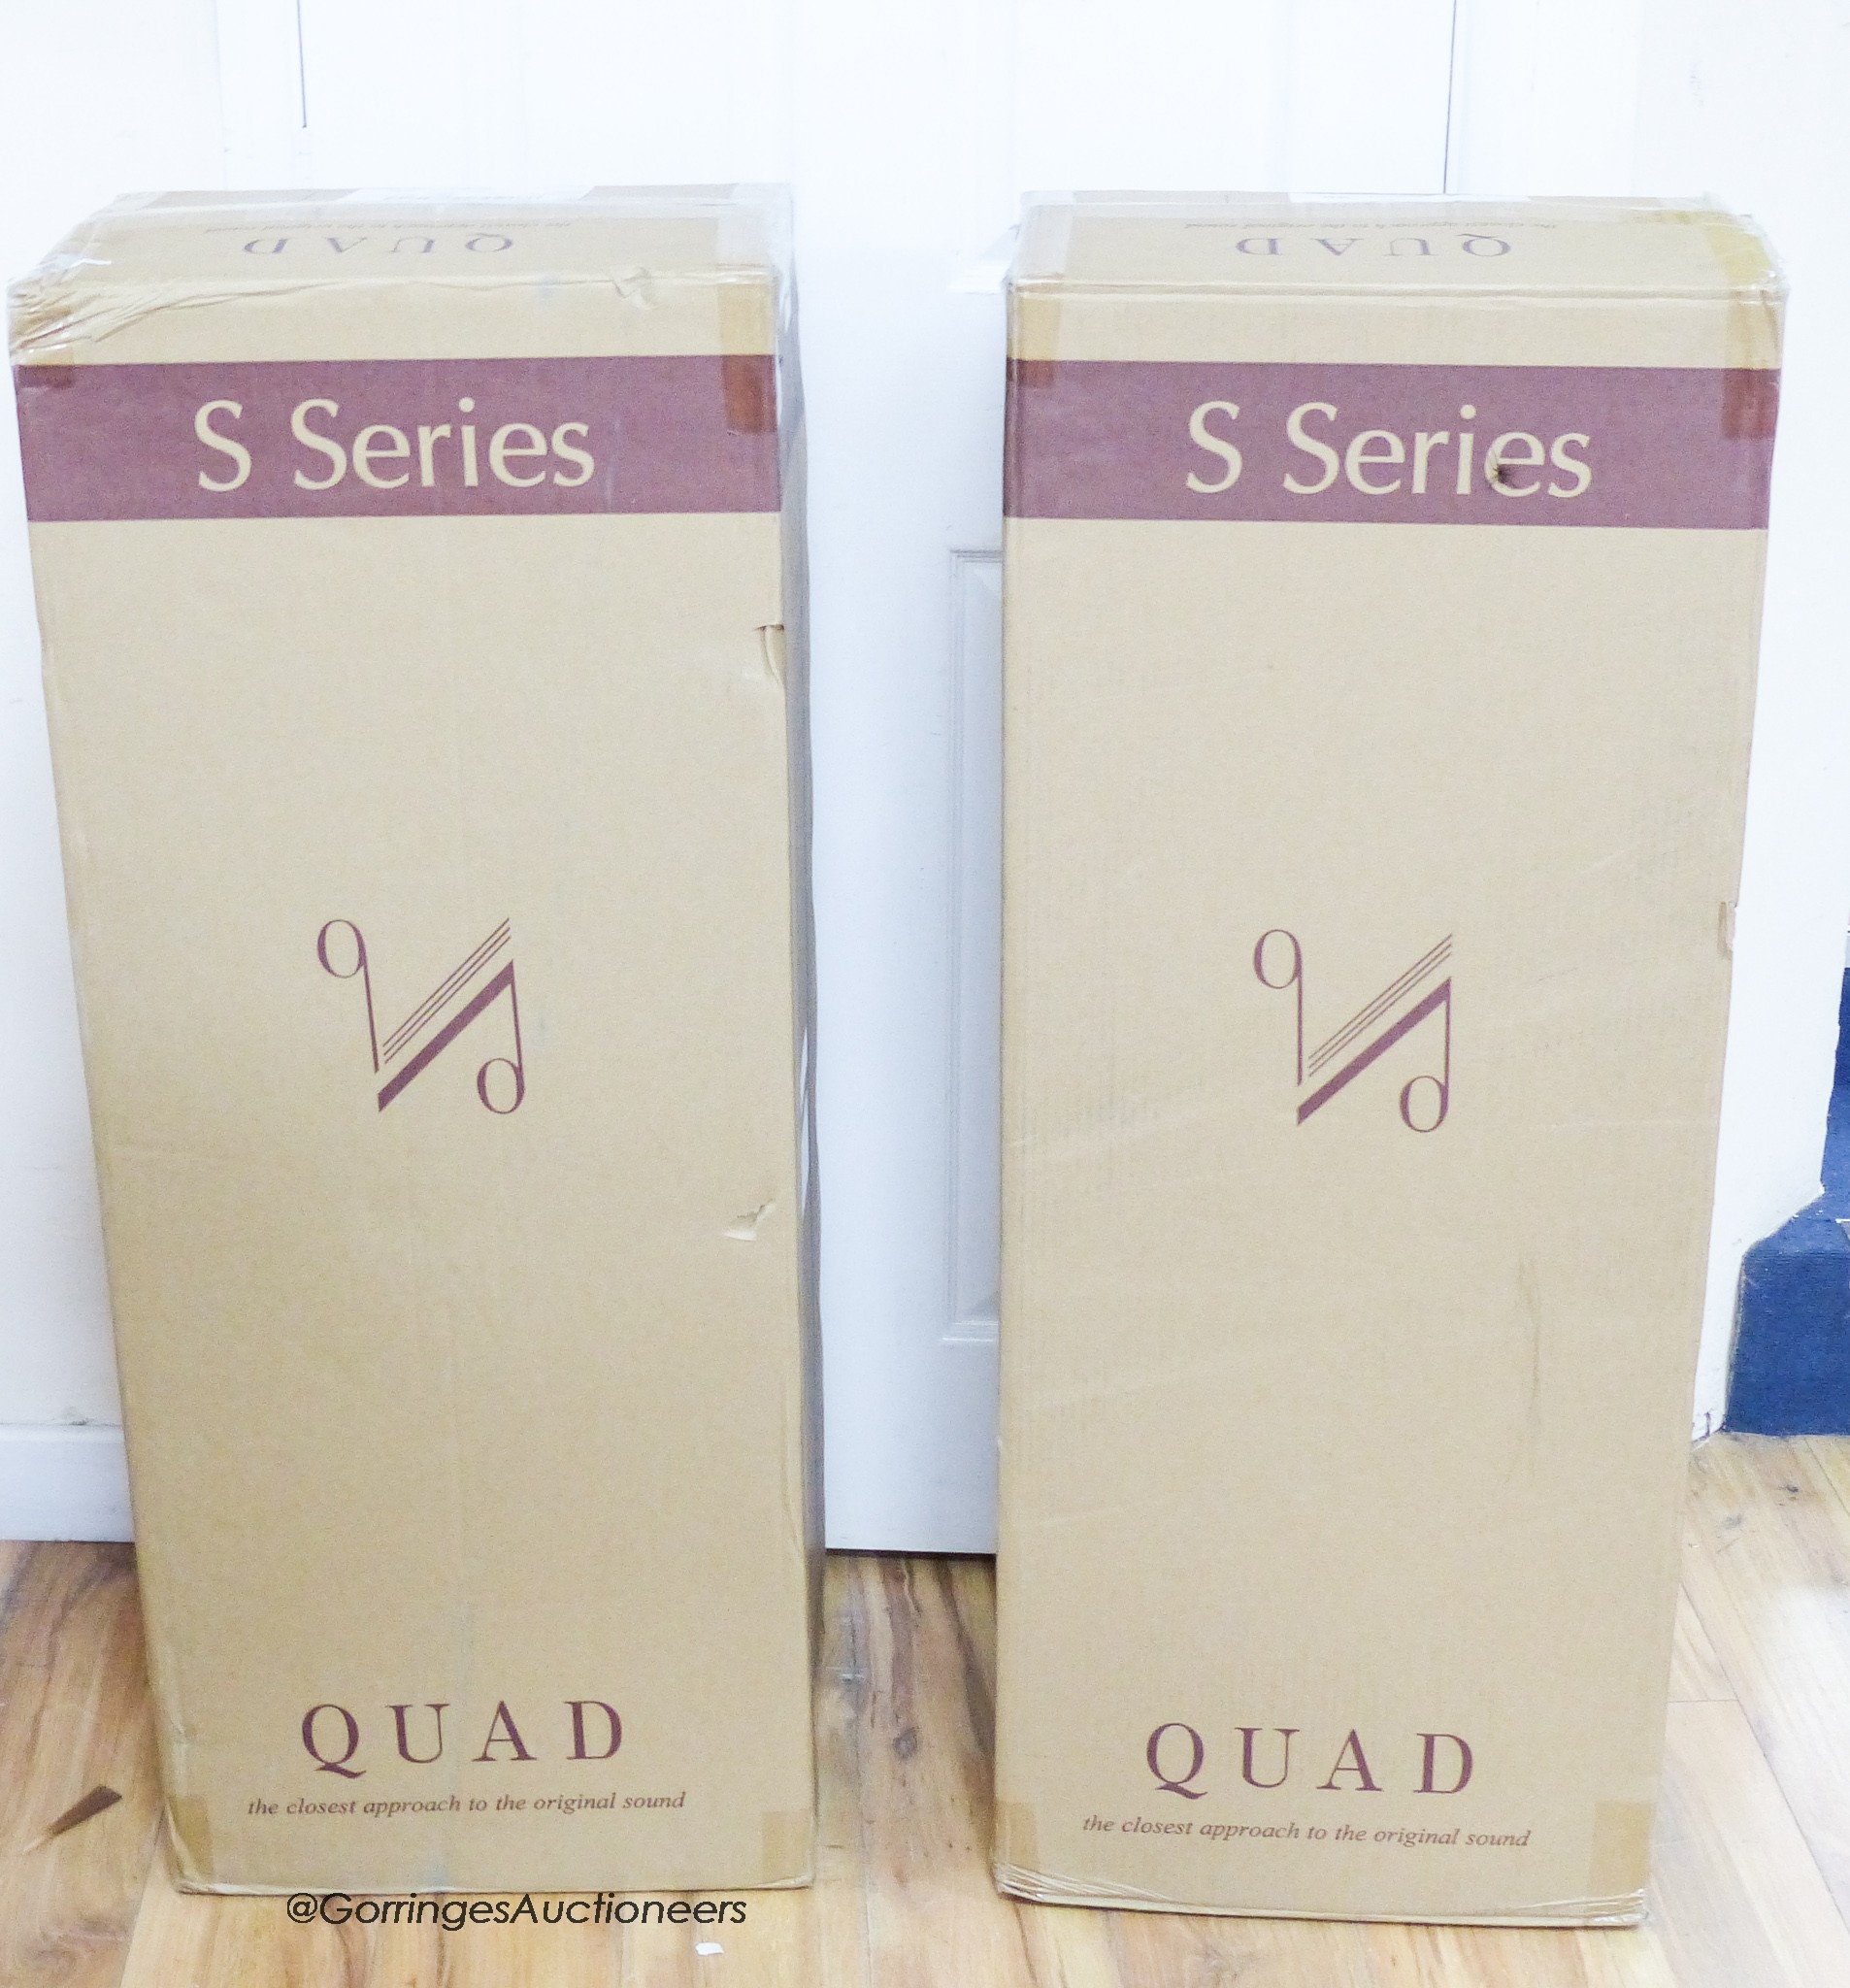 A pair of boxed Quad S Series speakers